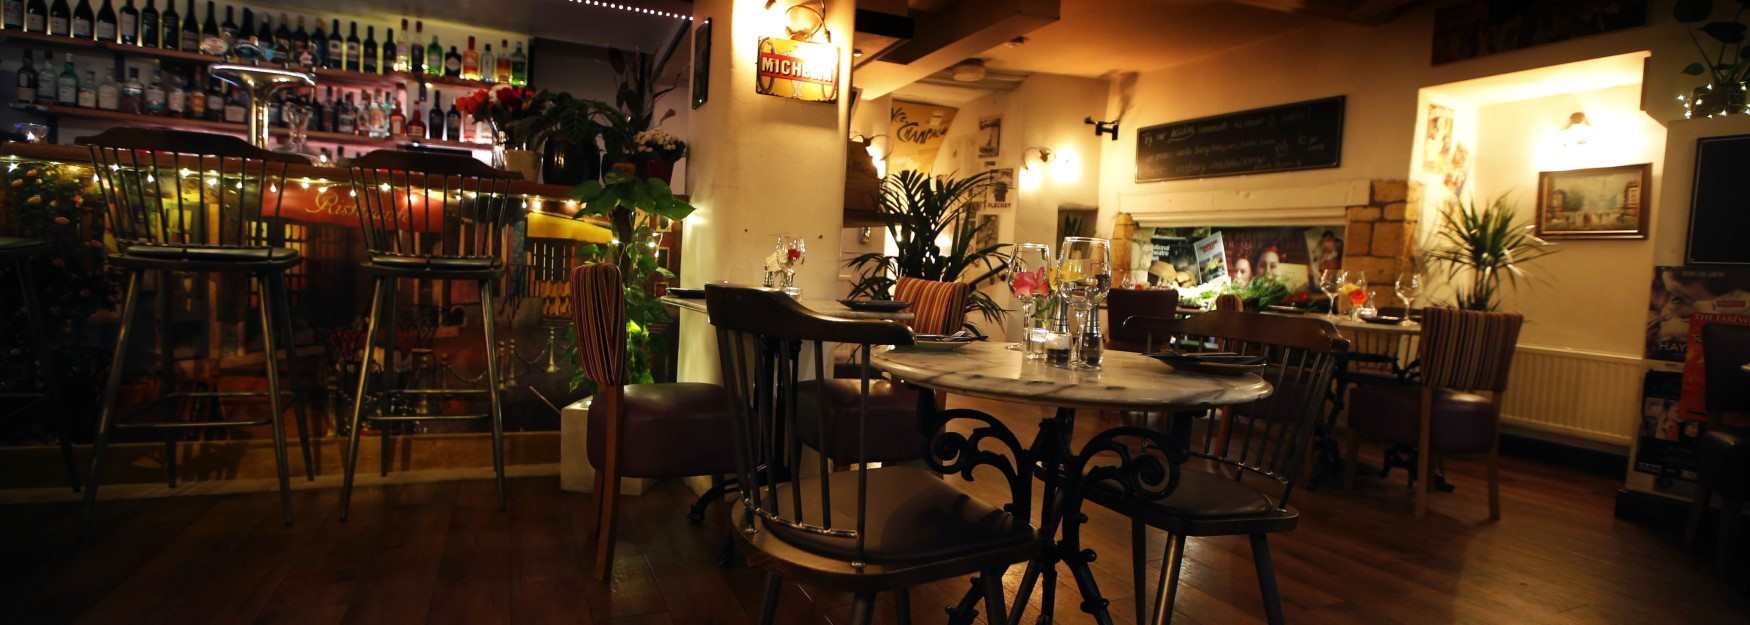 Inside Whistlers Bar & Restaurant in Chipping Norton